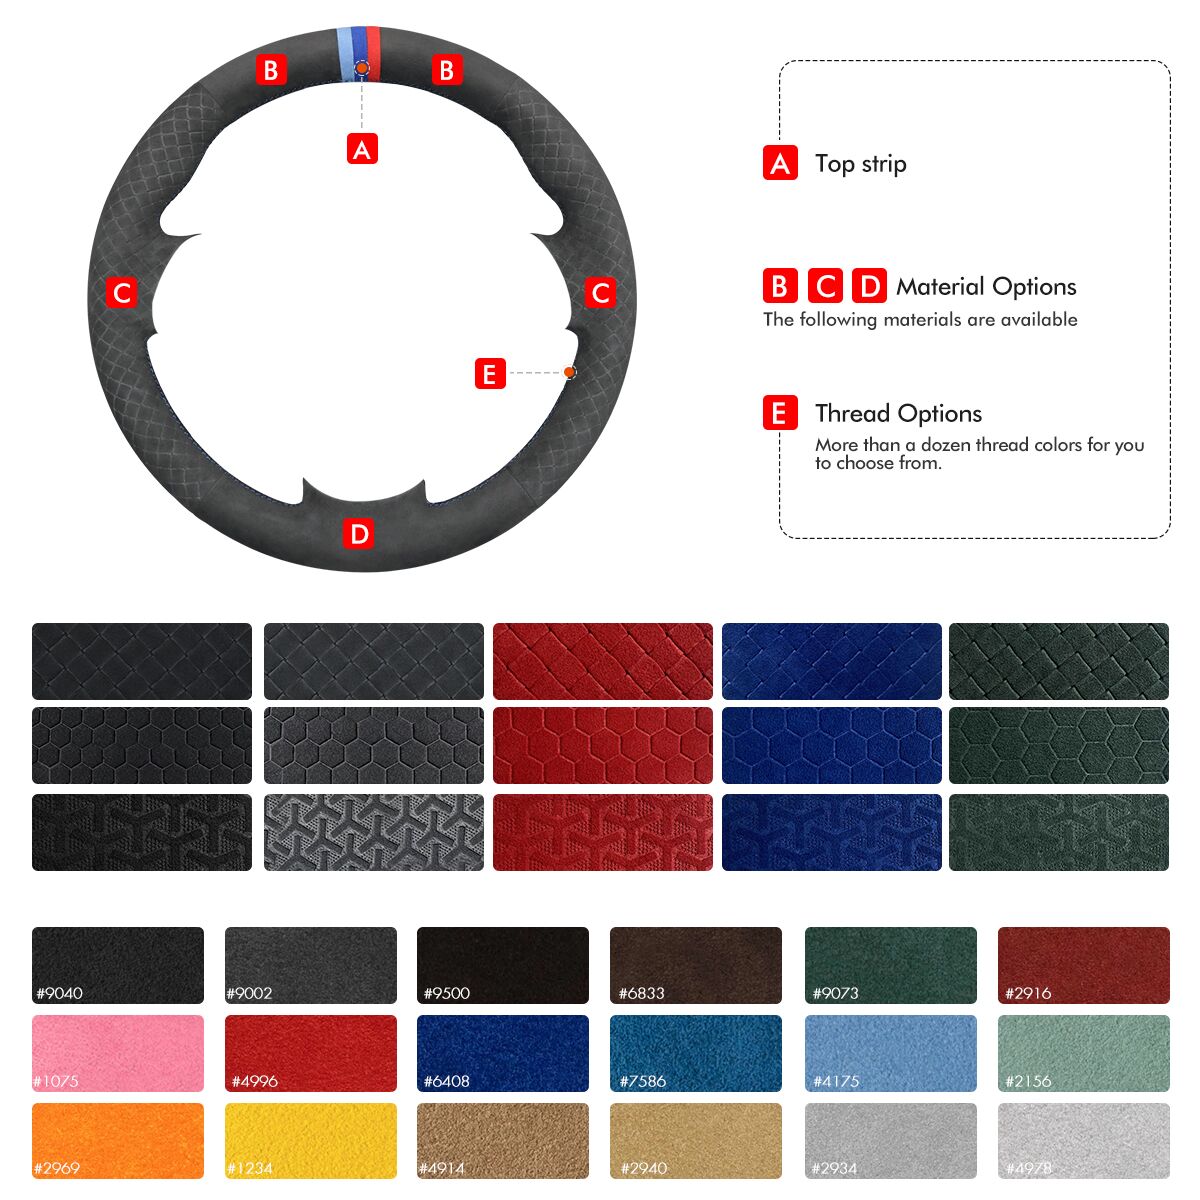 MEWANT DIY Black PU Leather Real Genuine Leather Car Steering Wheel Cover for Toyota Sienna 2011-2014